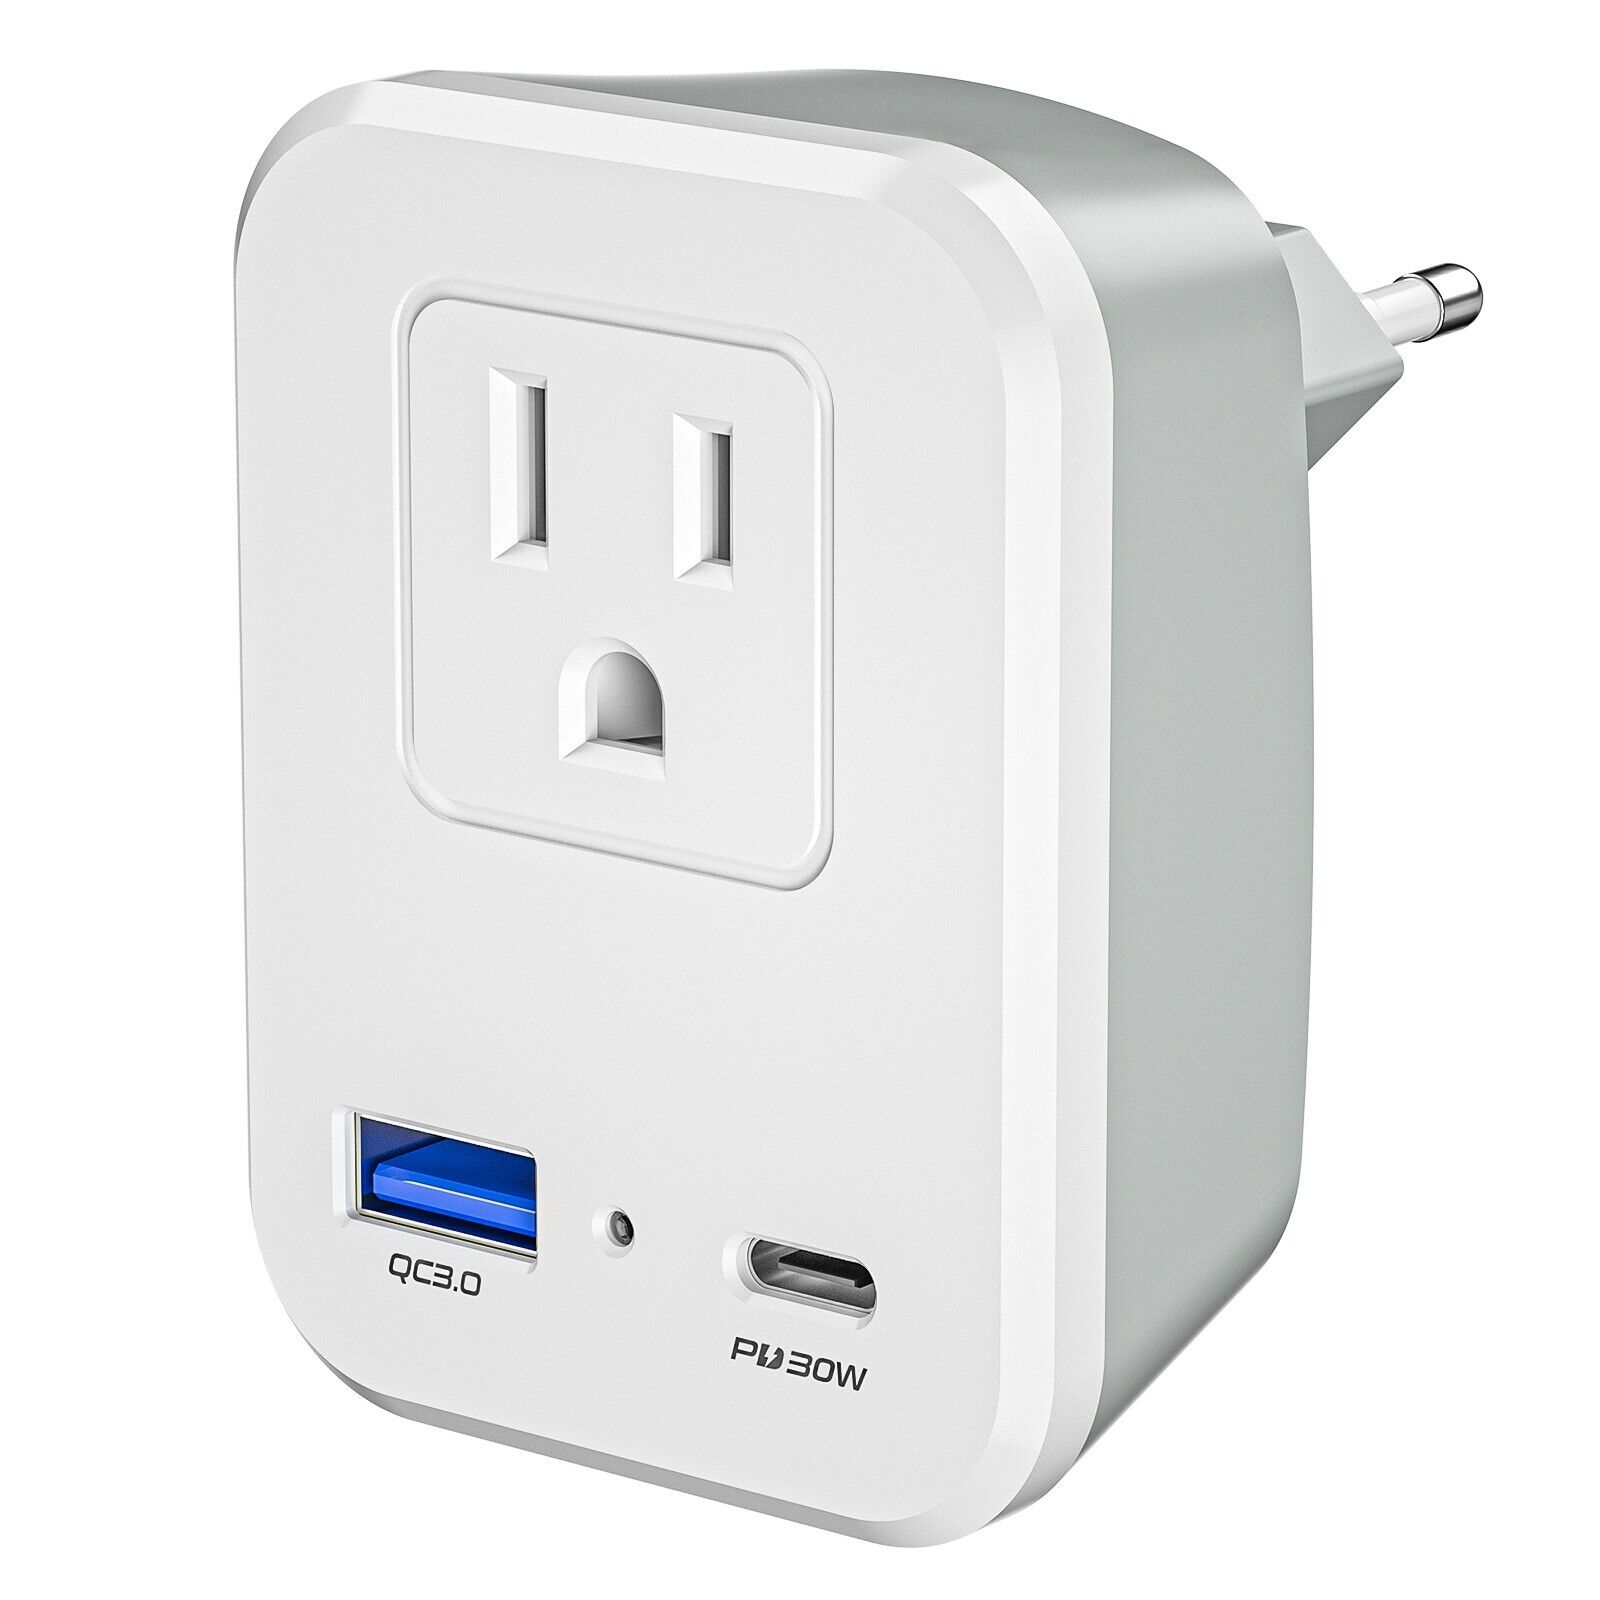 European Travel Plug Adapter Type C converter Dual USB for US to EU outlets